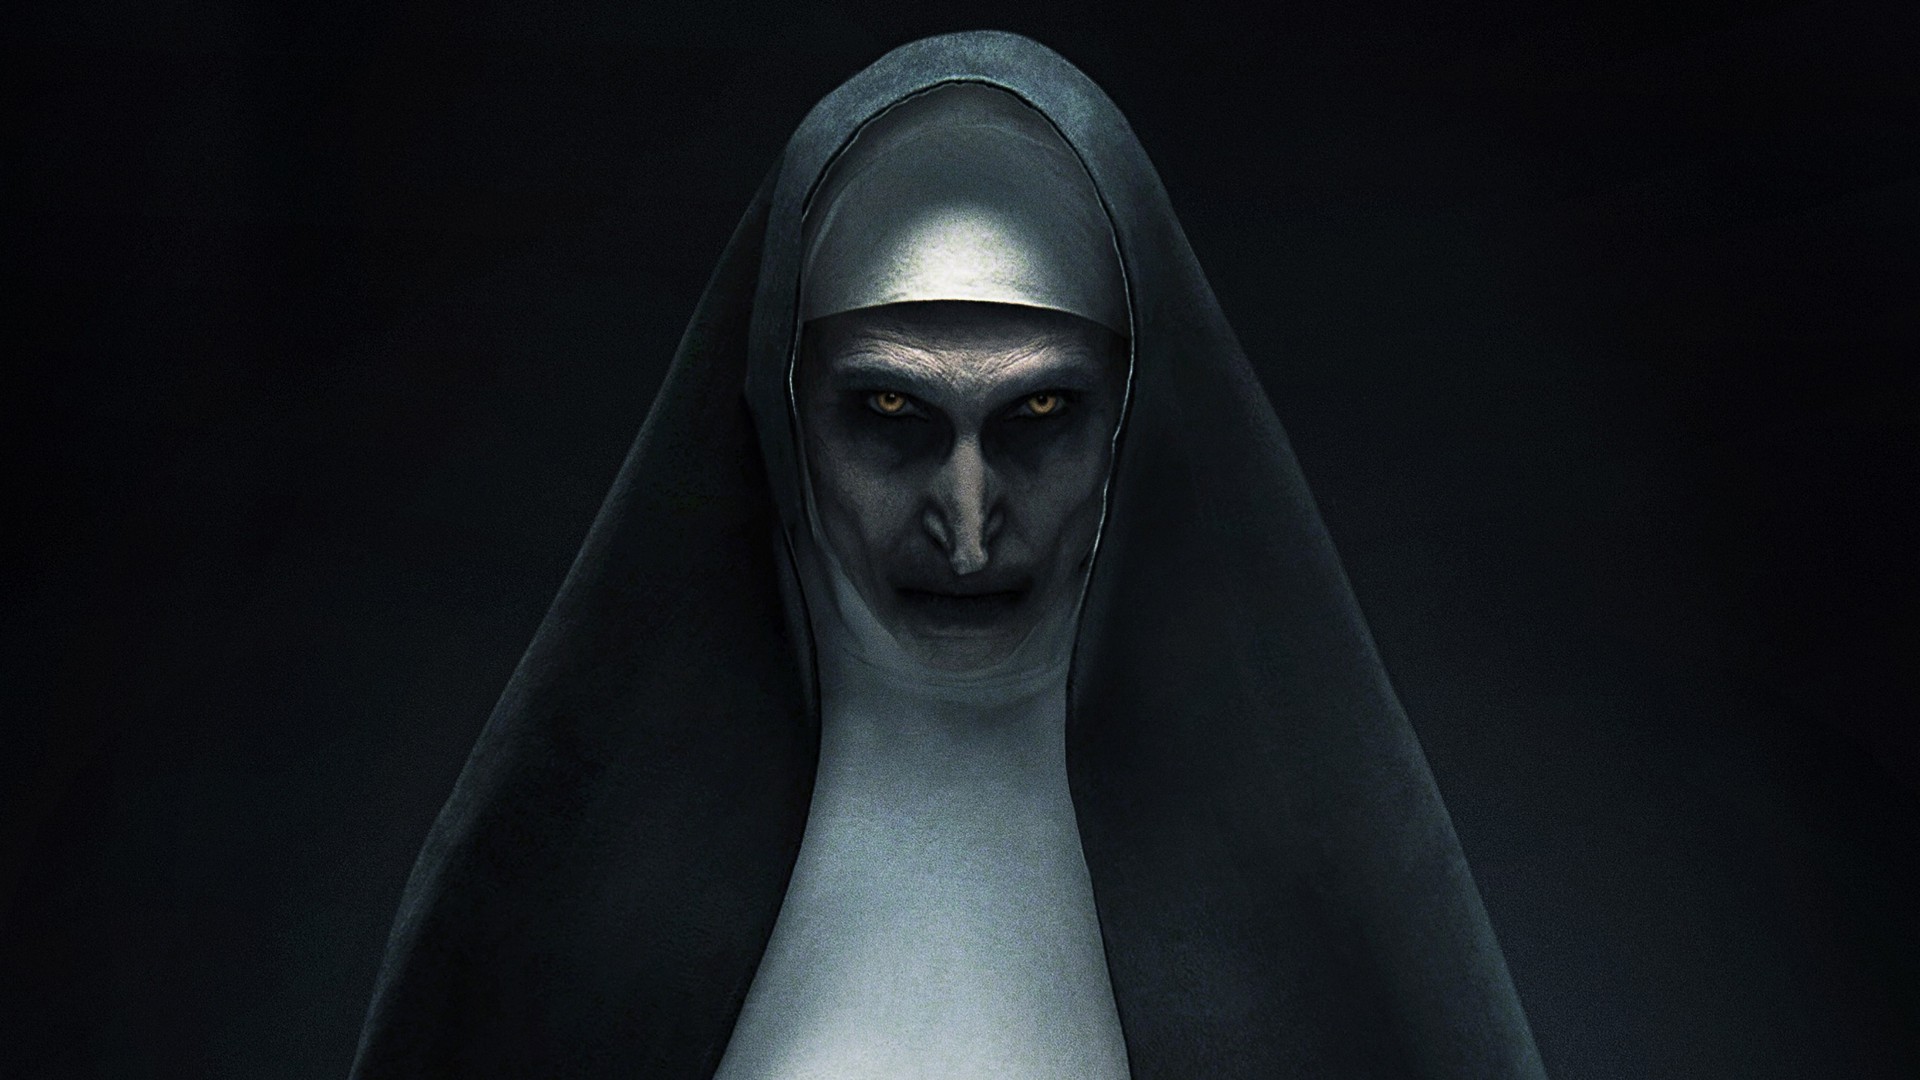 Wallpaper The Nun Desktop with image resolution 1920x1080 pixel. You can use this wallpaper as background for your desktop Computer Screensavers, Android or iPhone smartphones